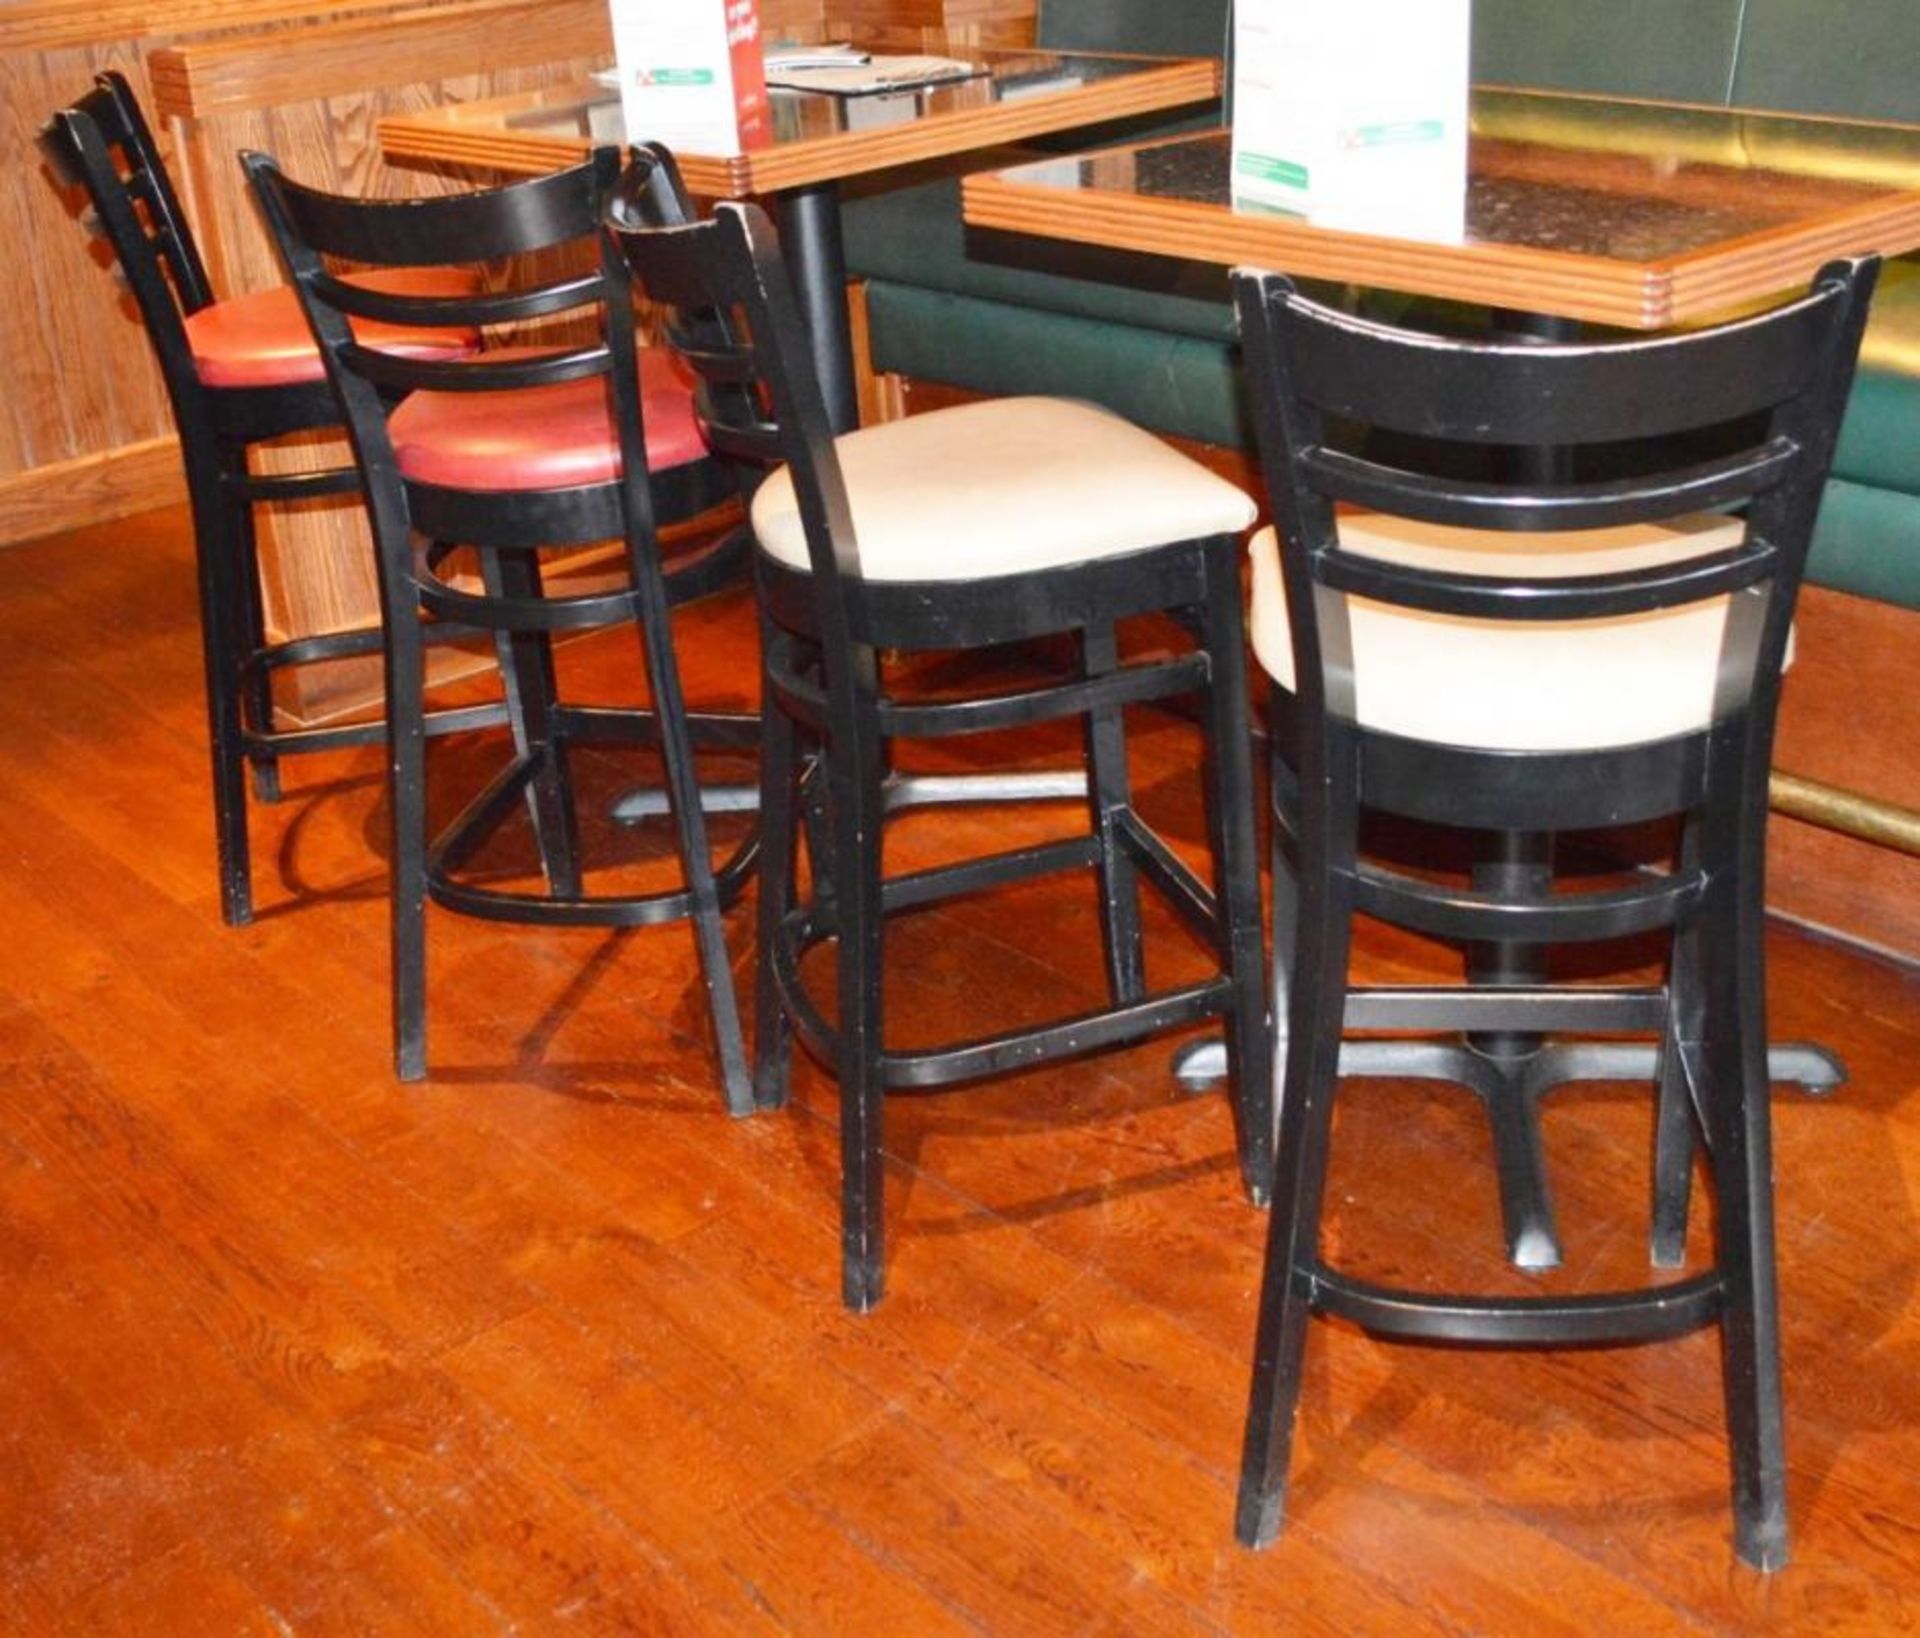 8 x Ladderback Bar Stools in Black and Cream and Red Faux Leather Seat Pads - CL357 - Location: Bolt - Image 5 of 9